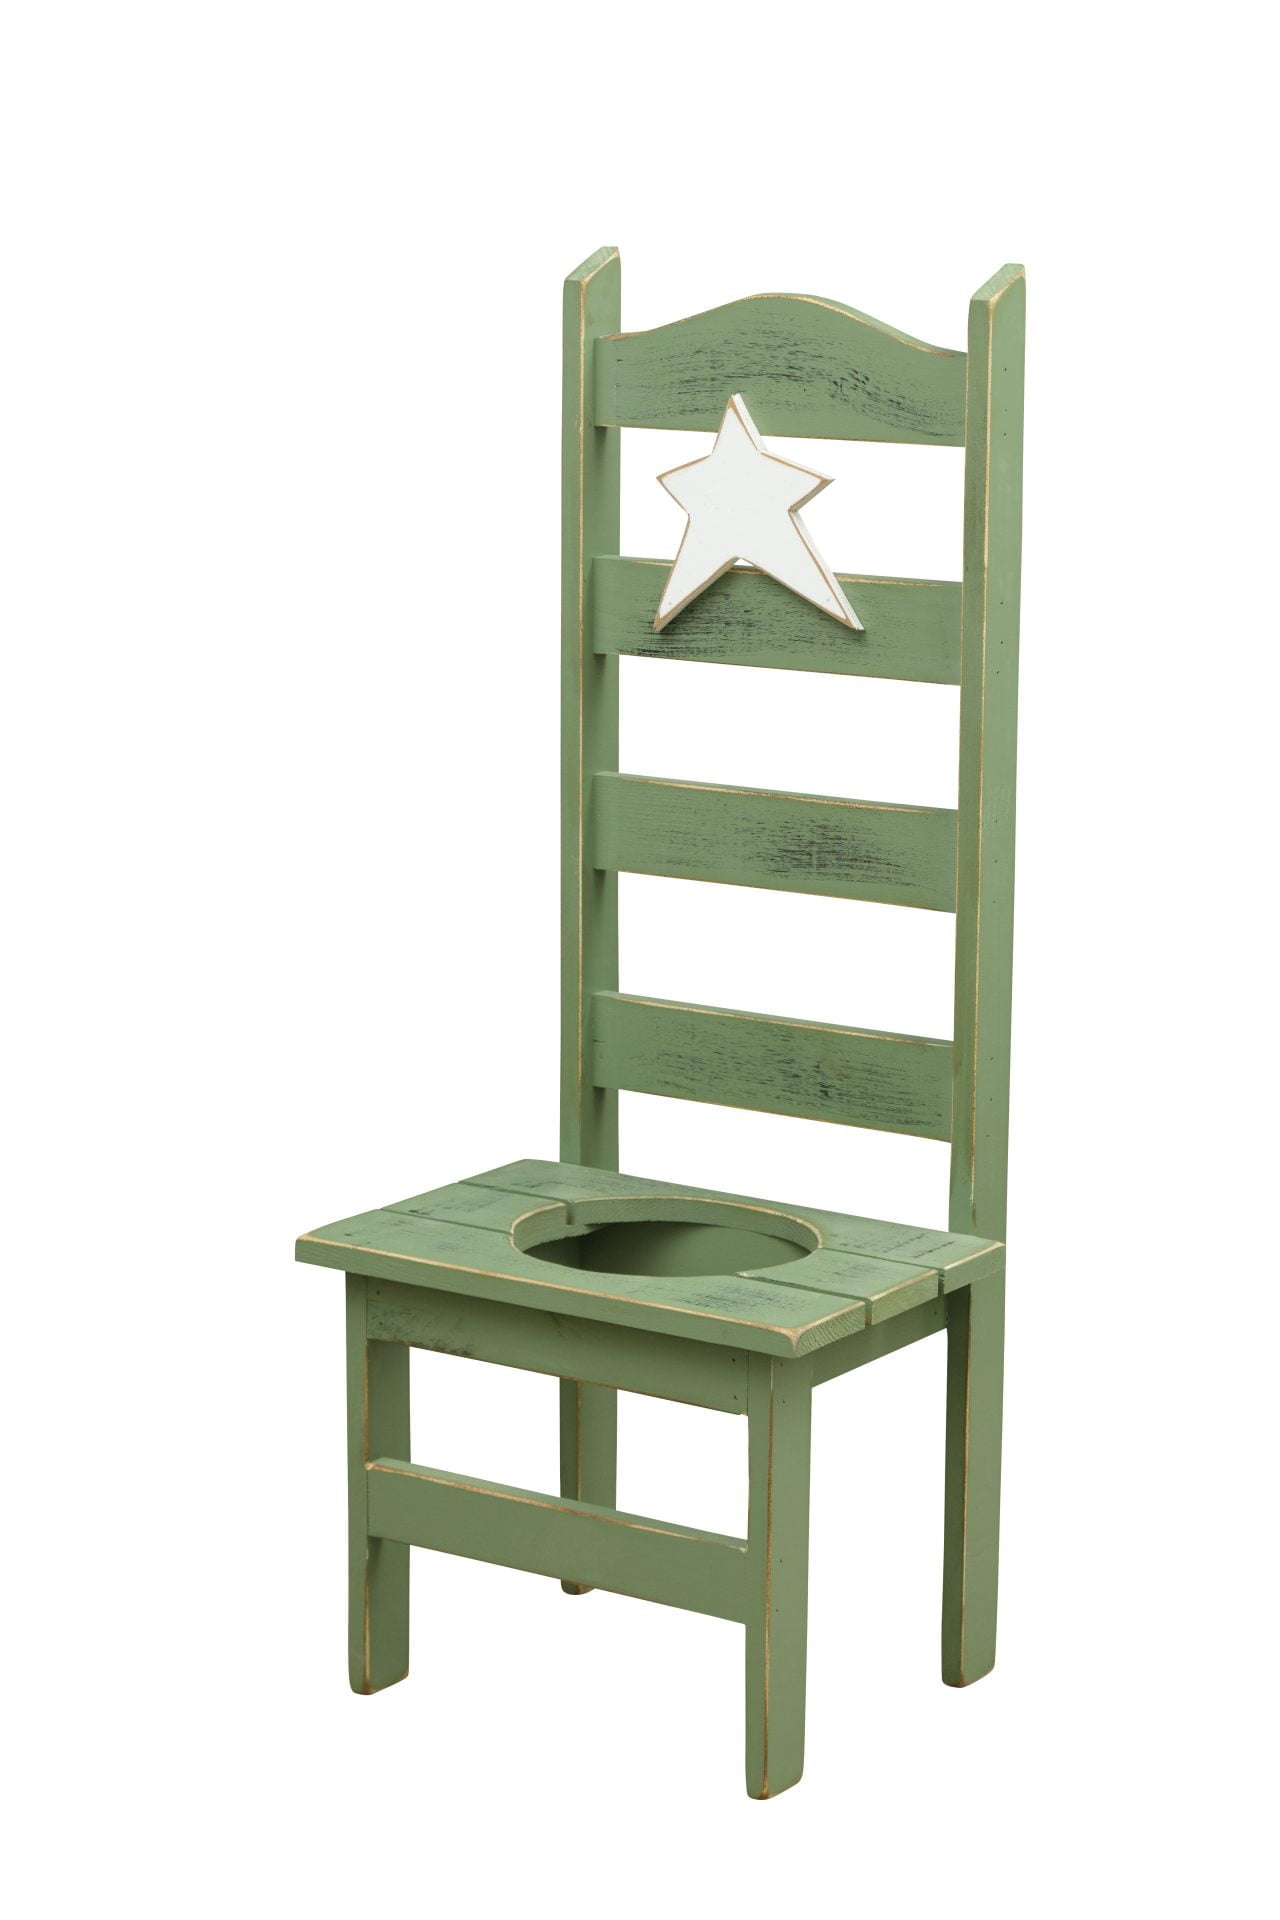 Primitive Pine Flower Pot Holder Chair with Rustic Star